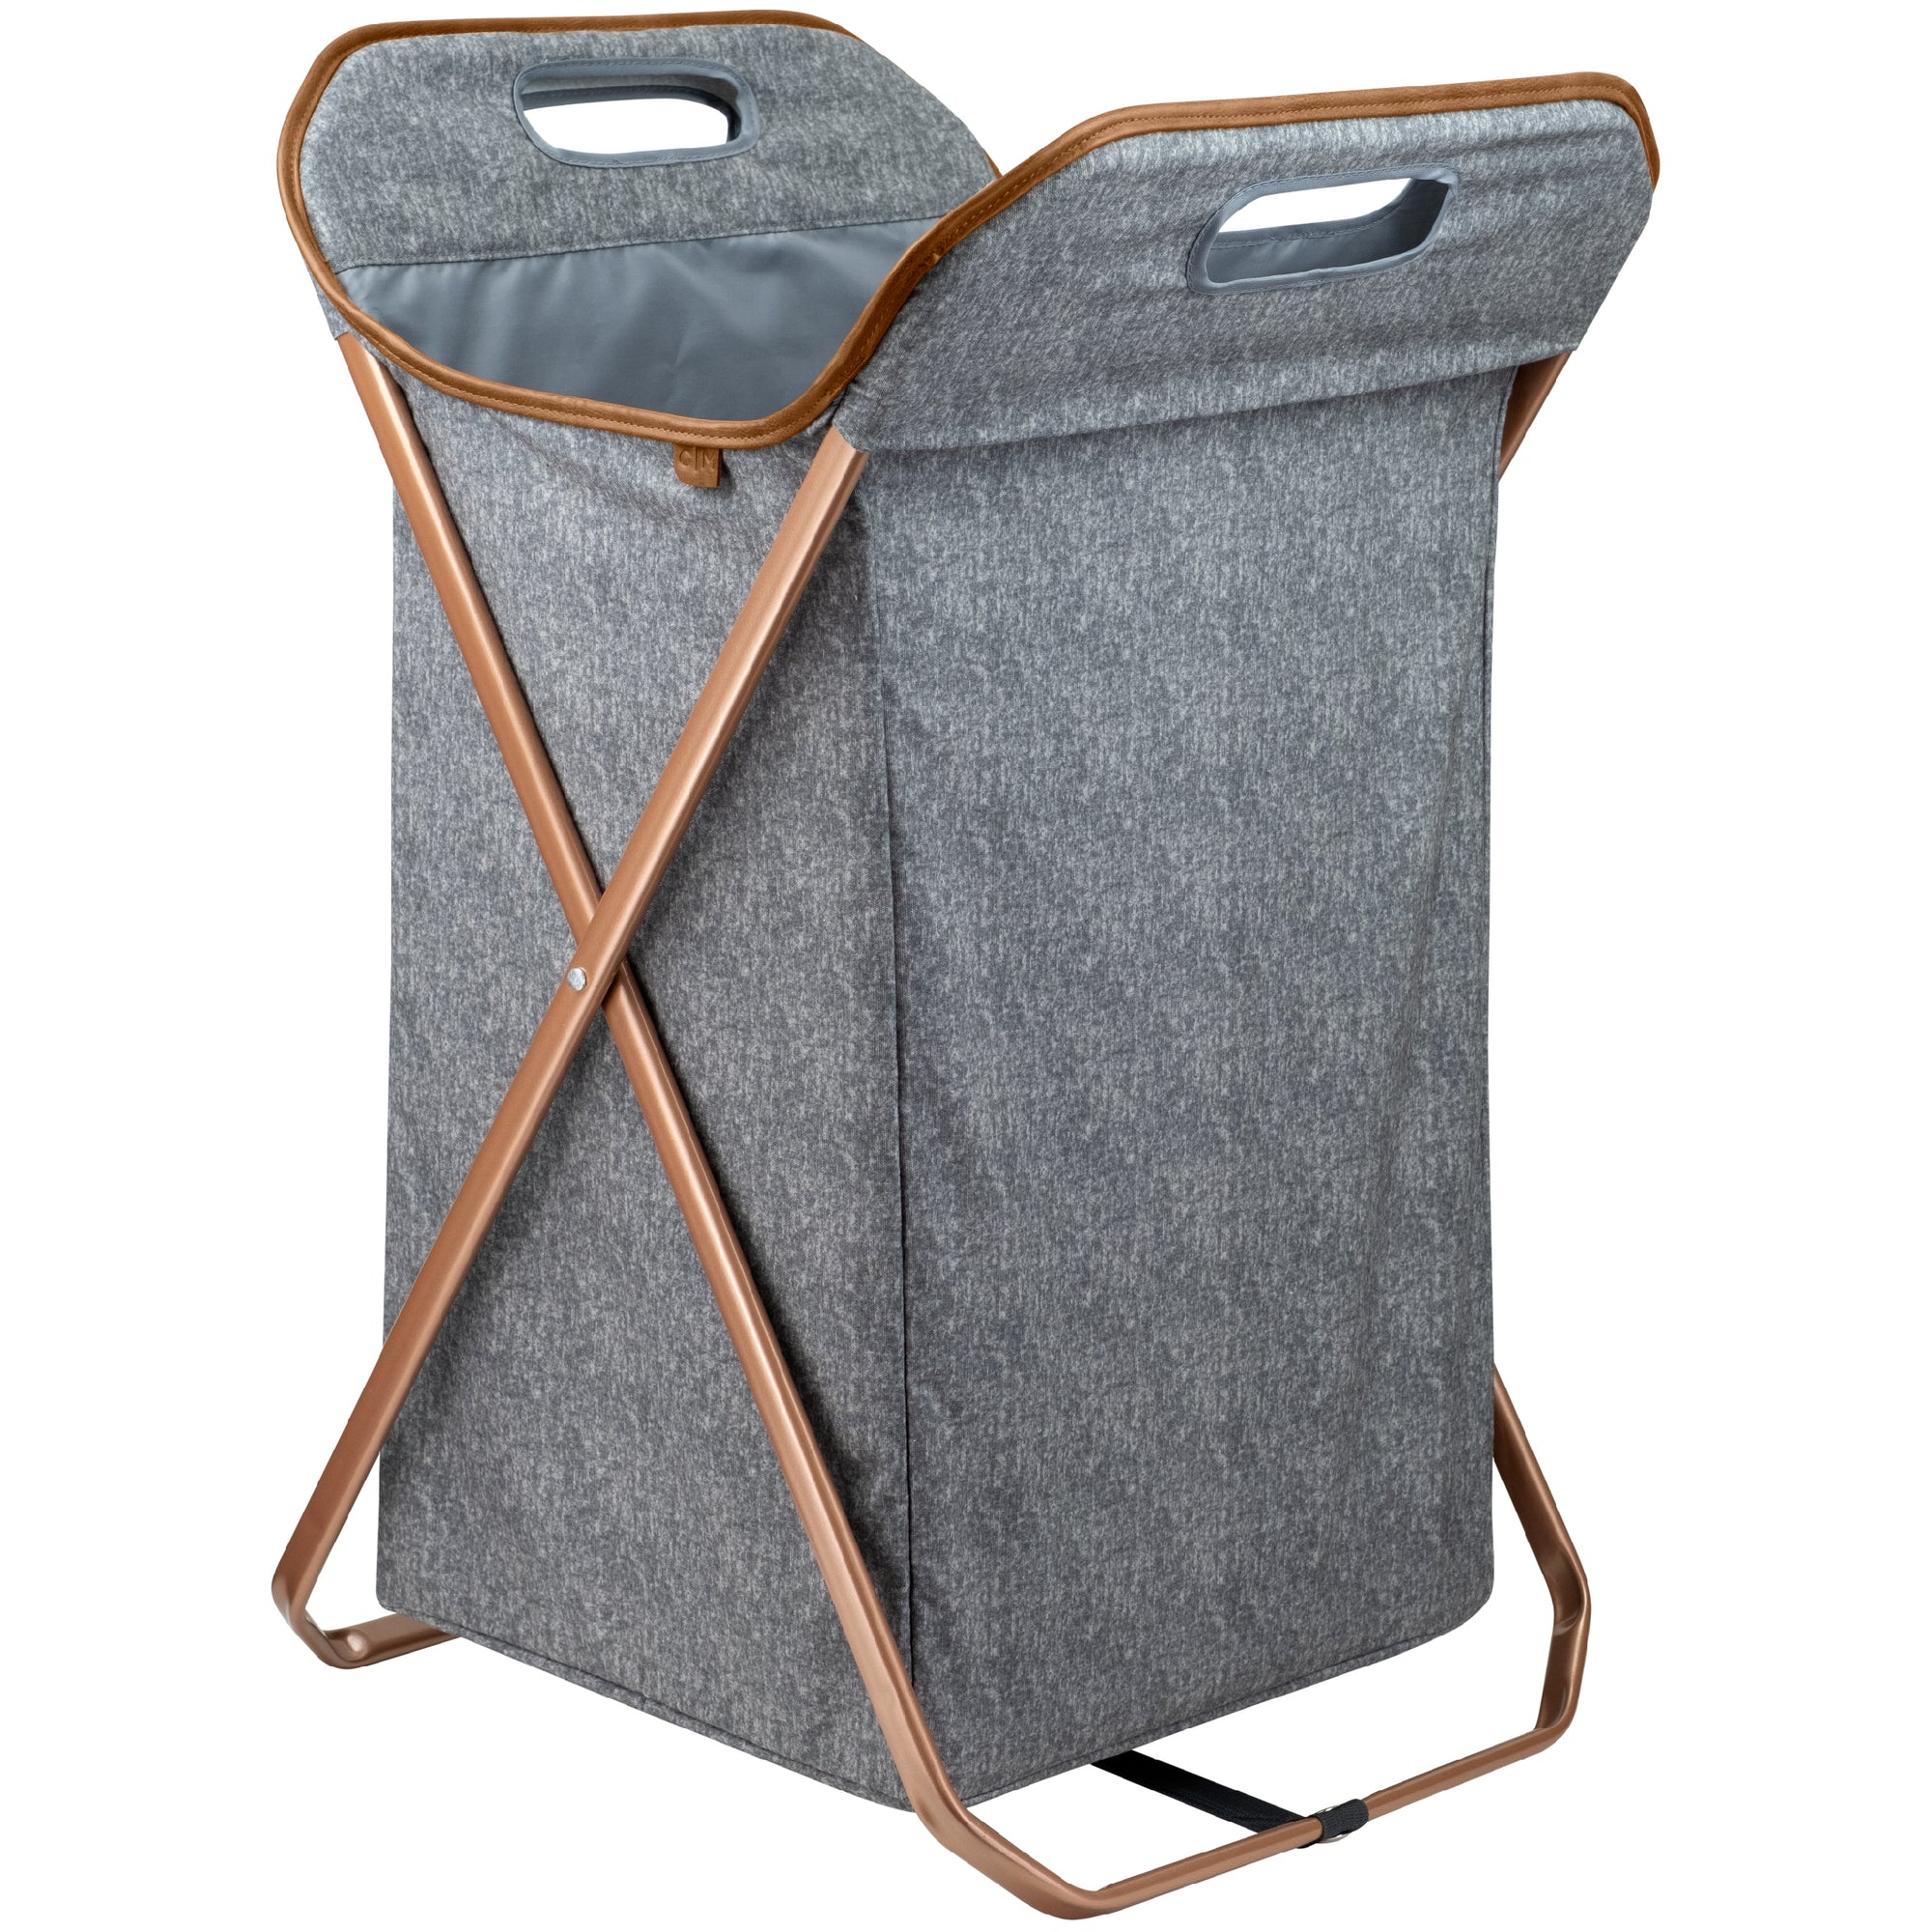 Clevermade Collapsible Laundry Caddy, Large Foldable Clothes Hamper Bag, Laundry